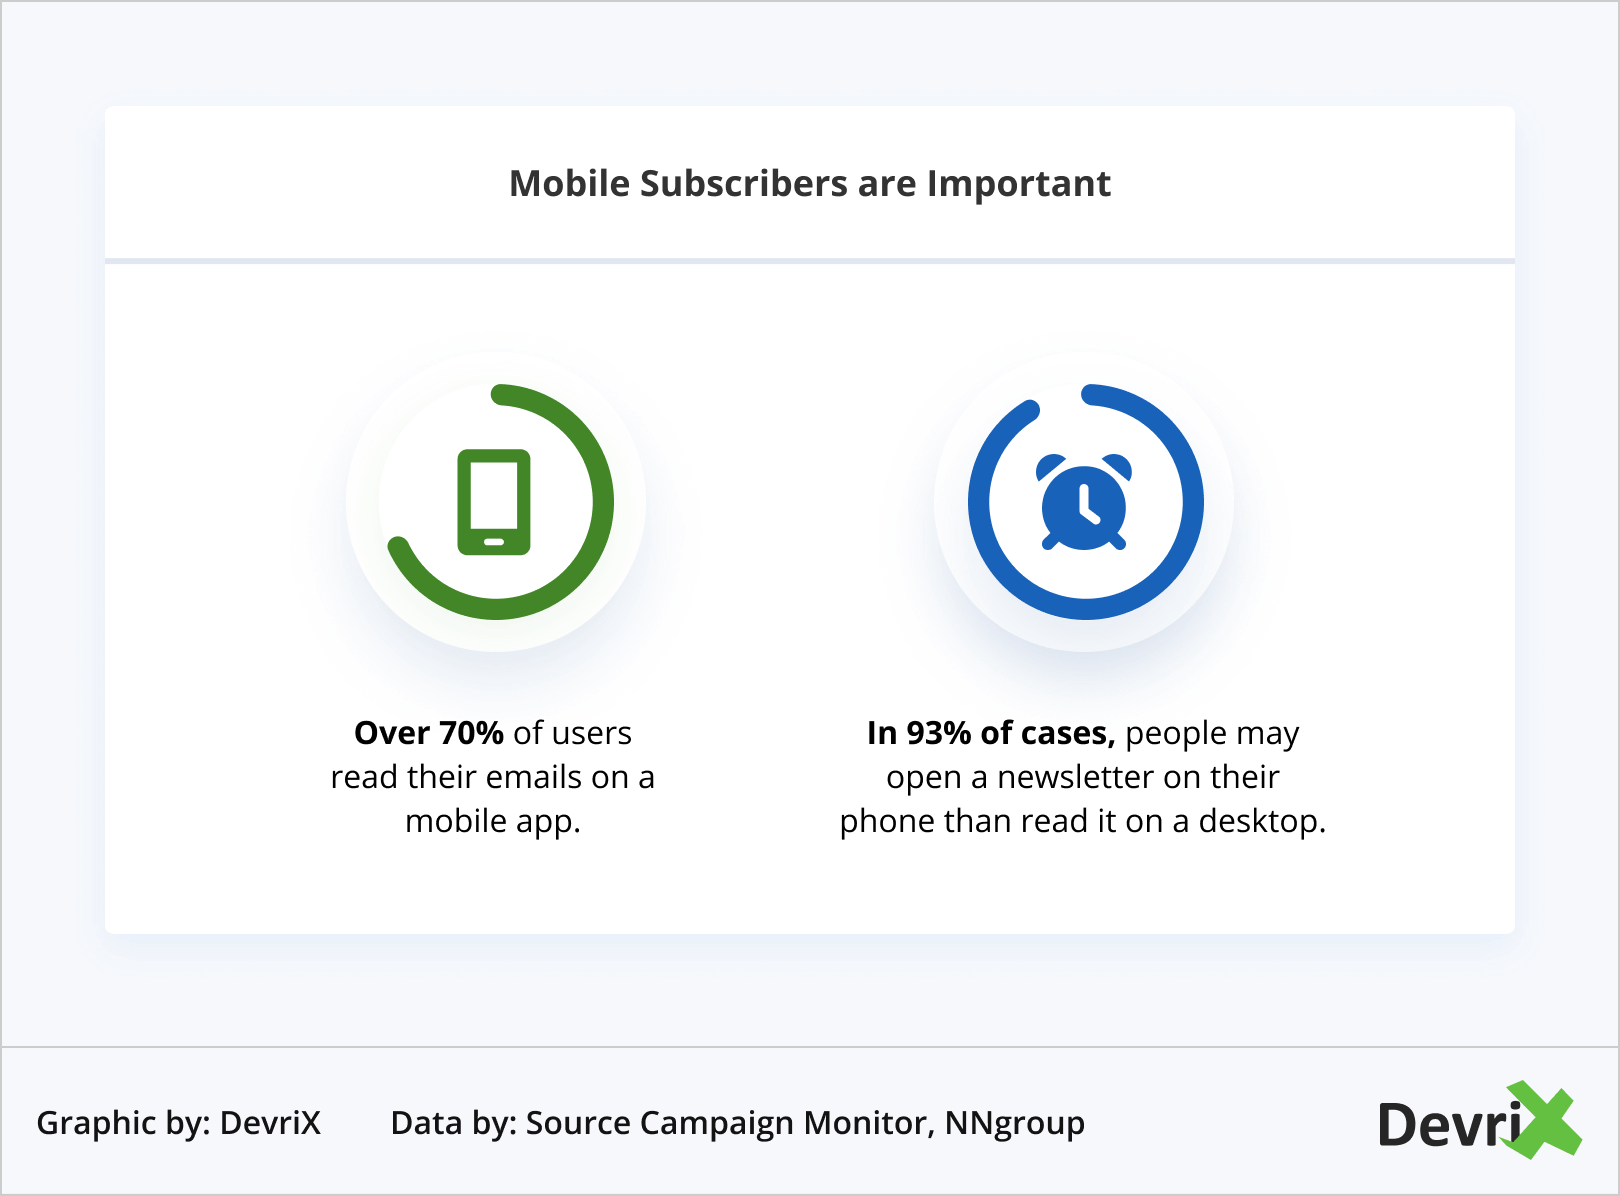 Mobile Subscribers are Important